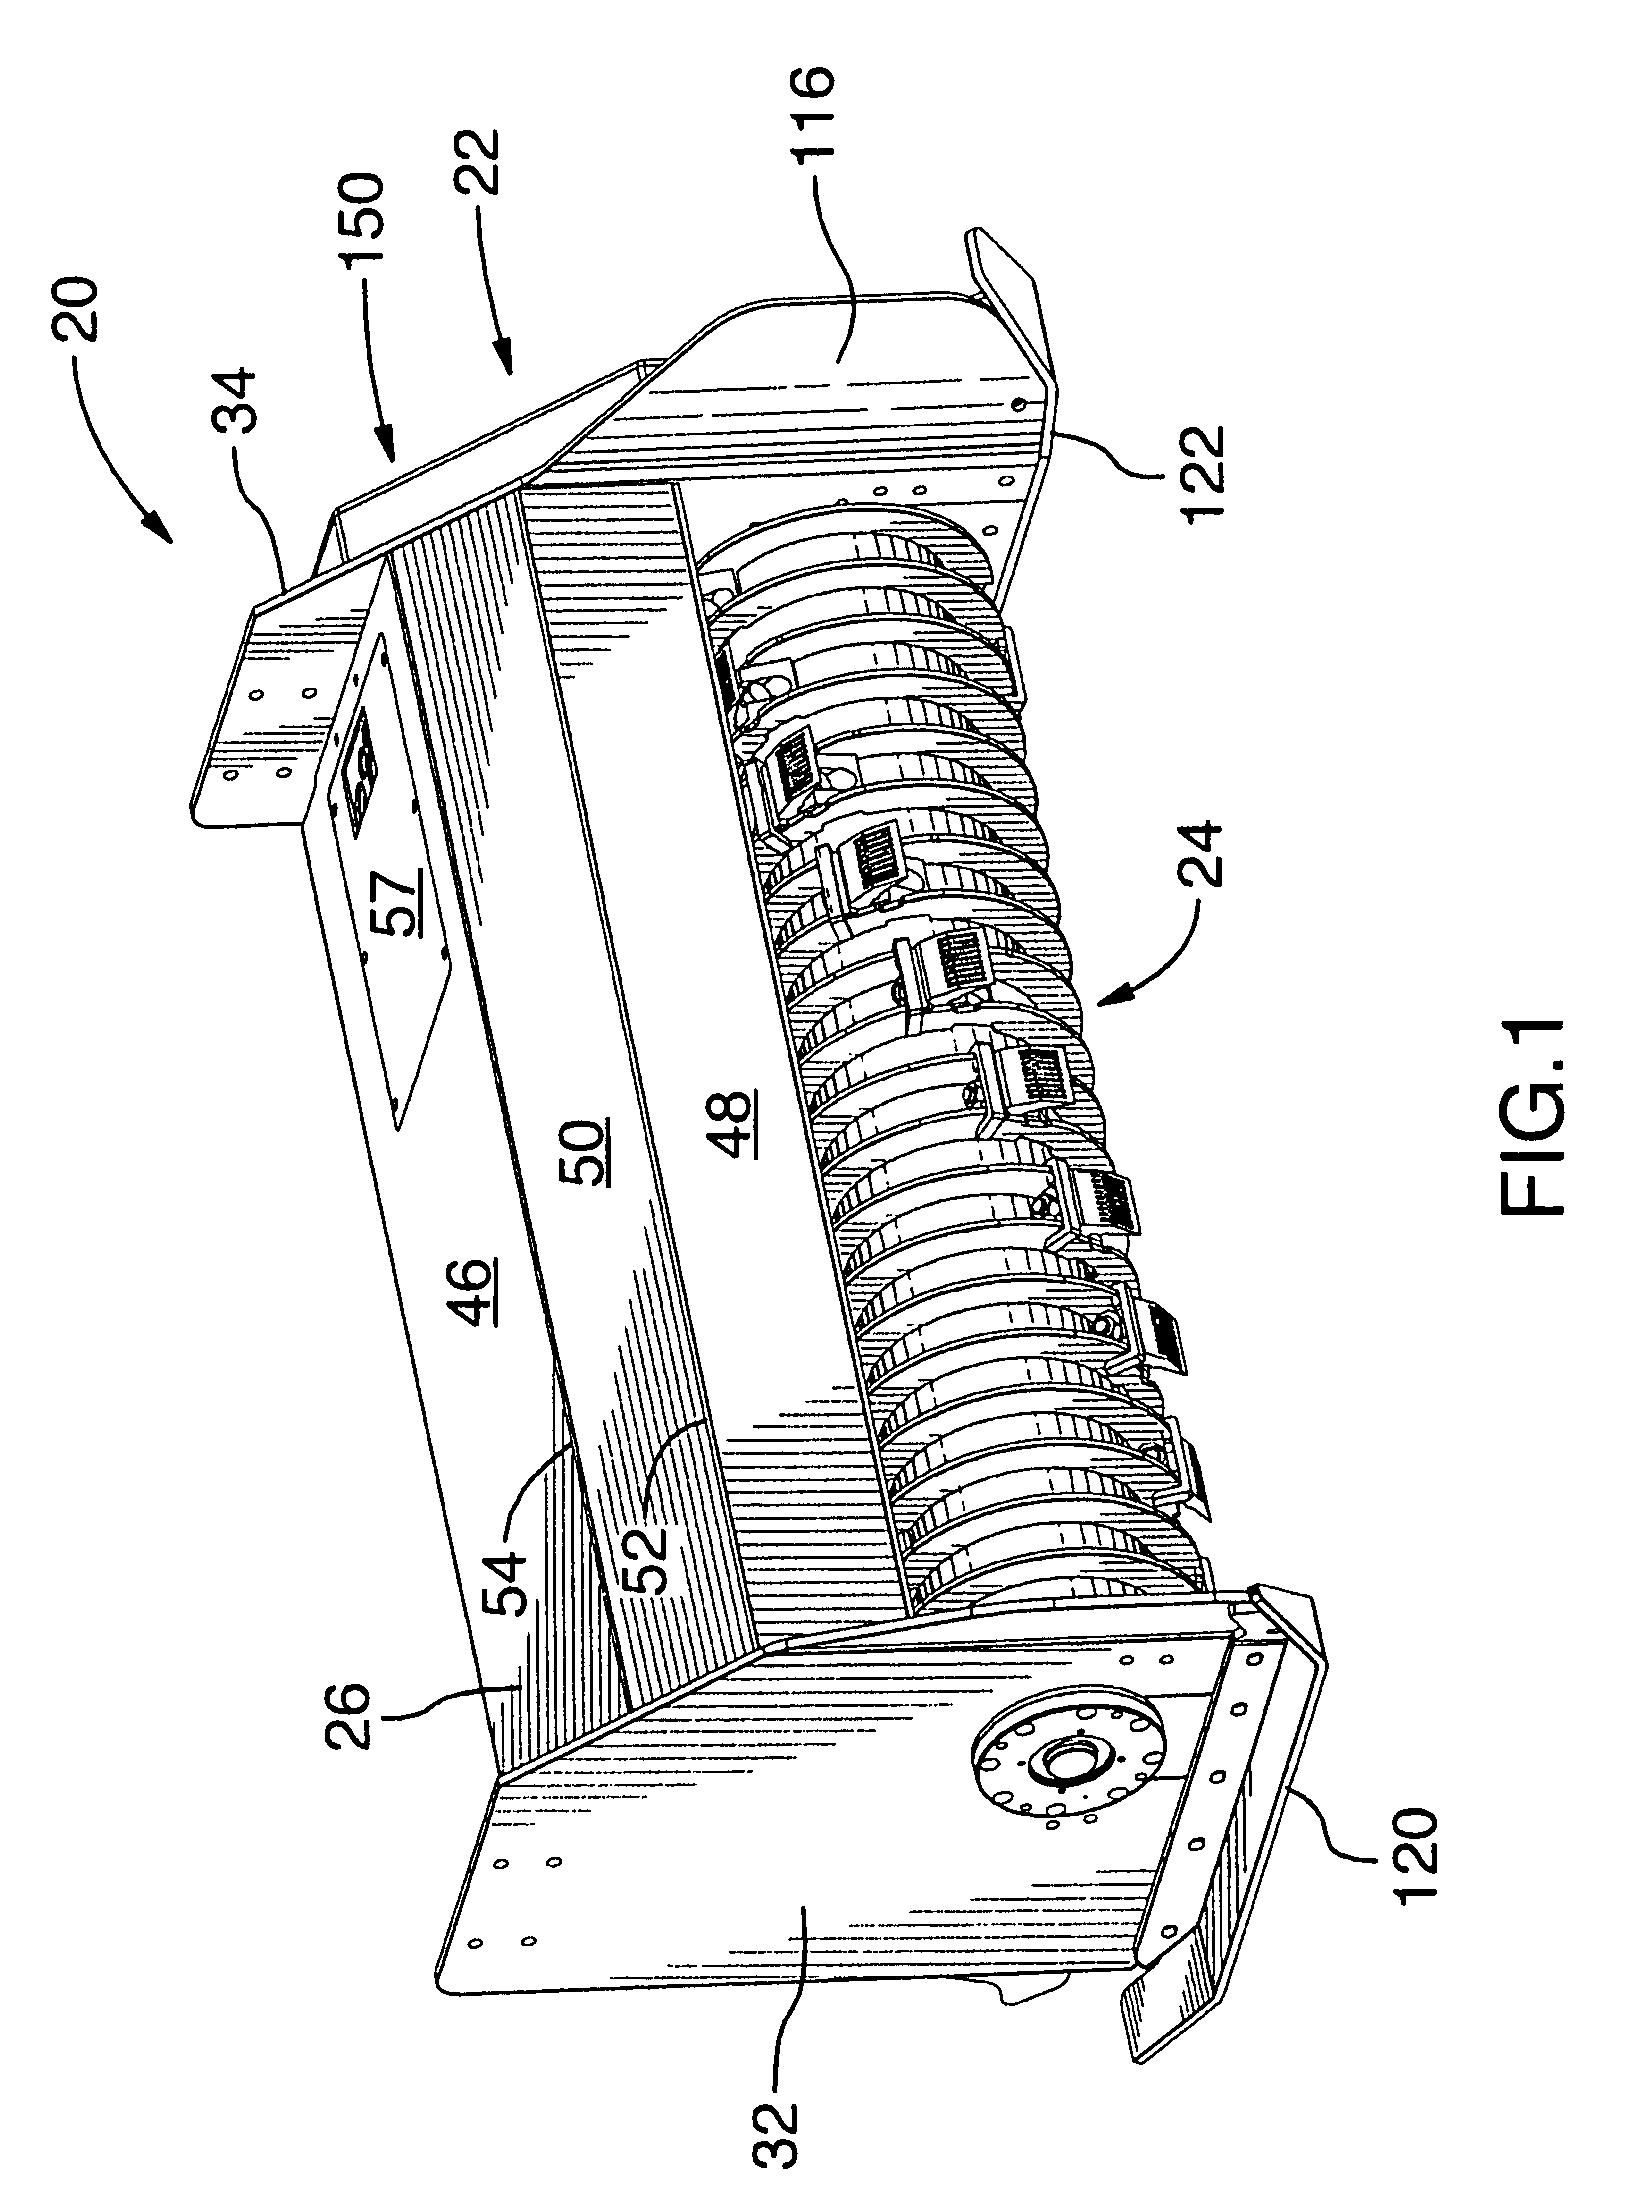 Brush cutting head with internally housed drive and bearing assembly